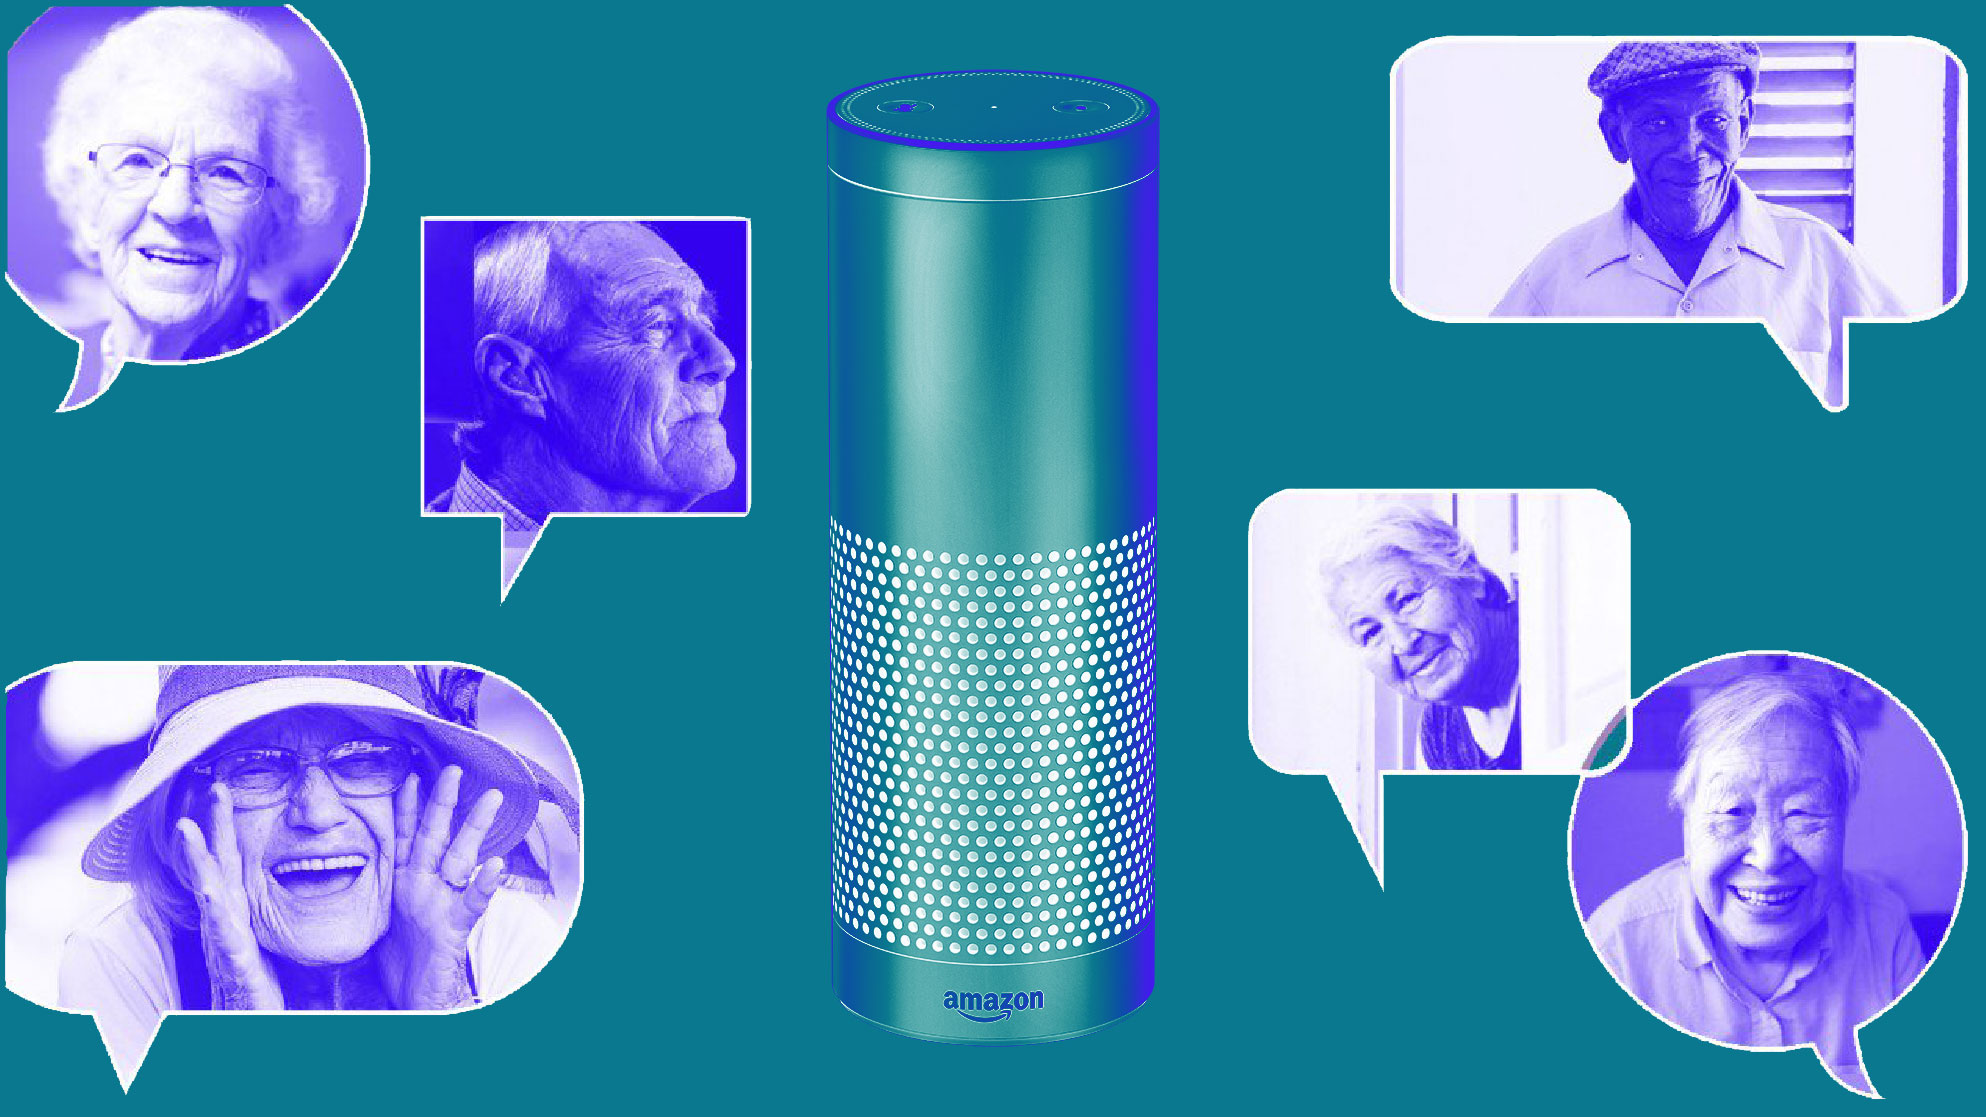 cuscús Bienes manguera Alexa will be your best friend when you're older | MIT Technology Review